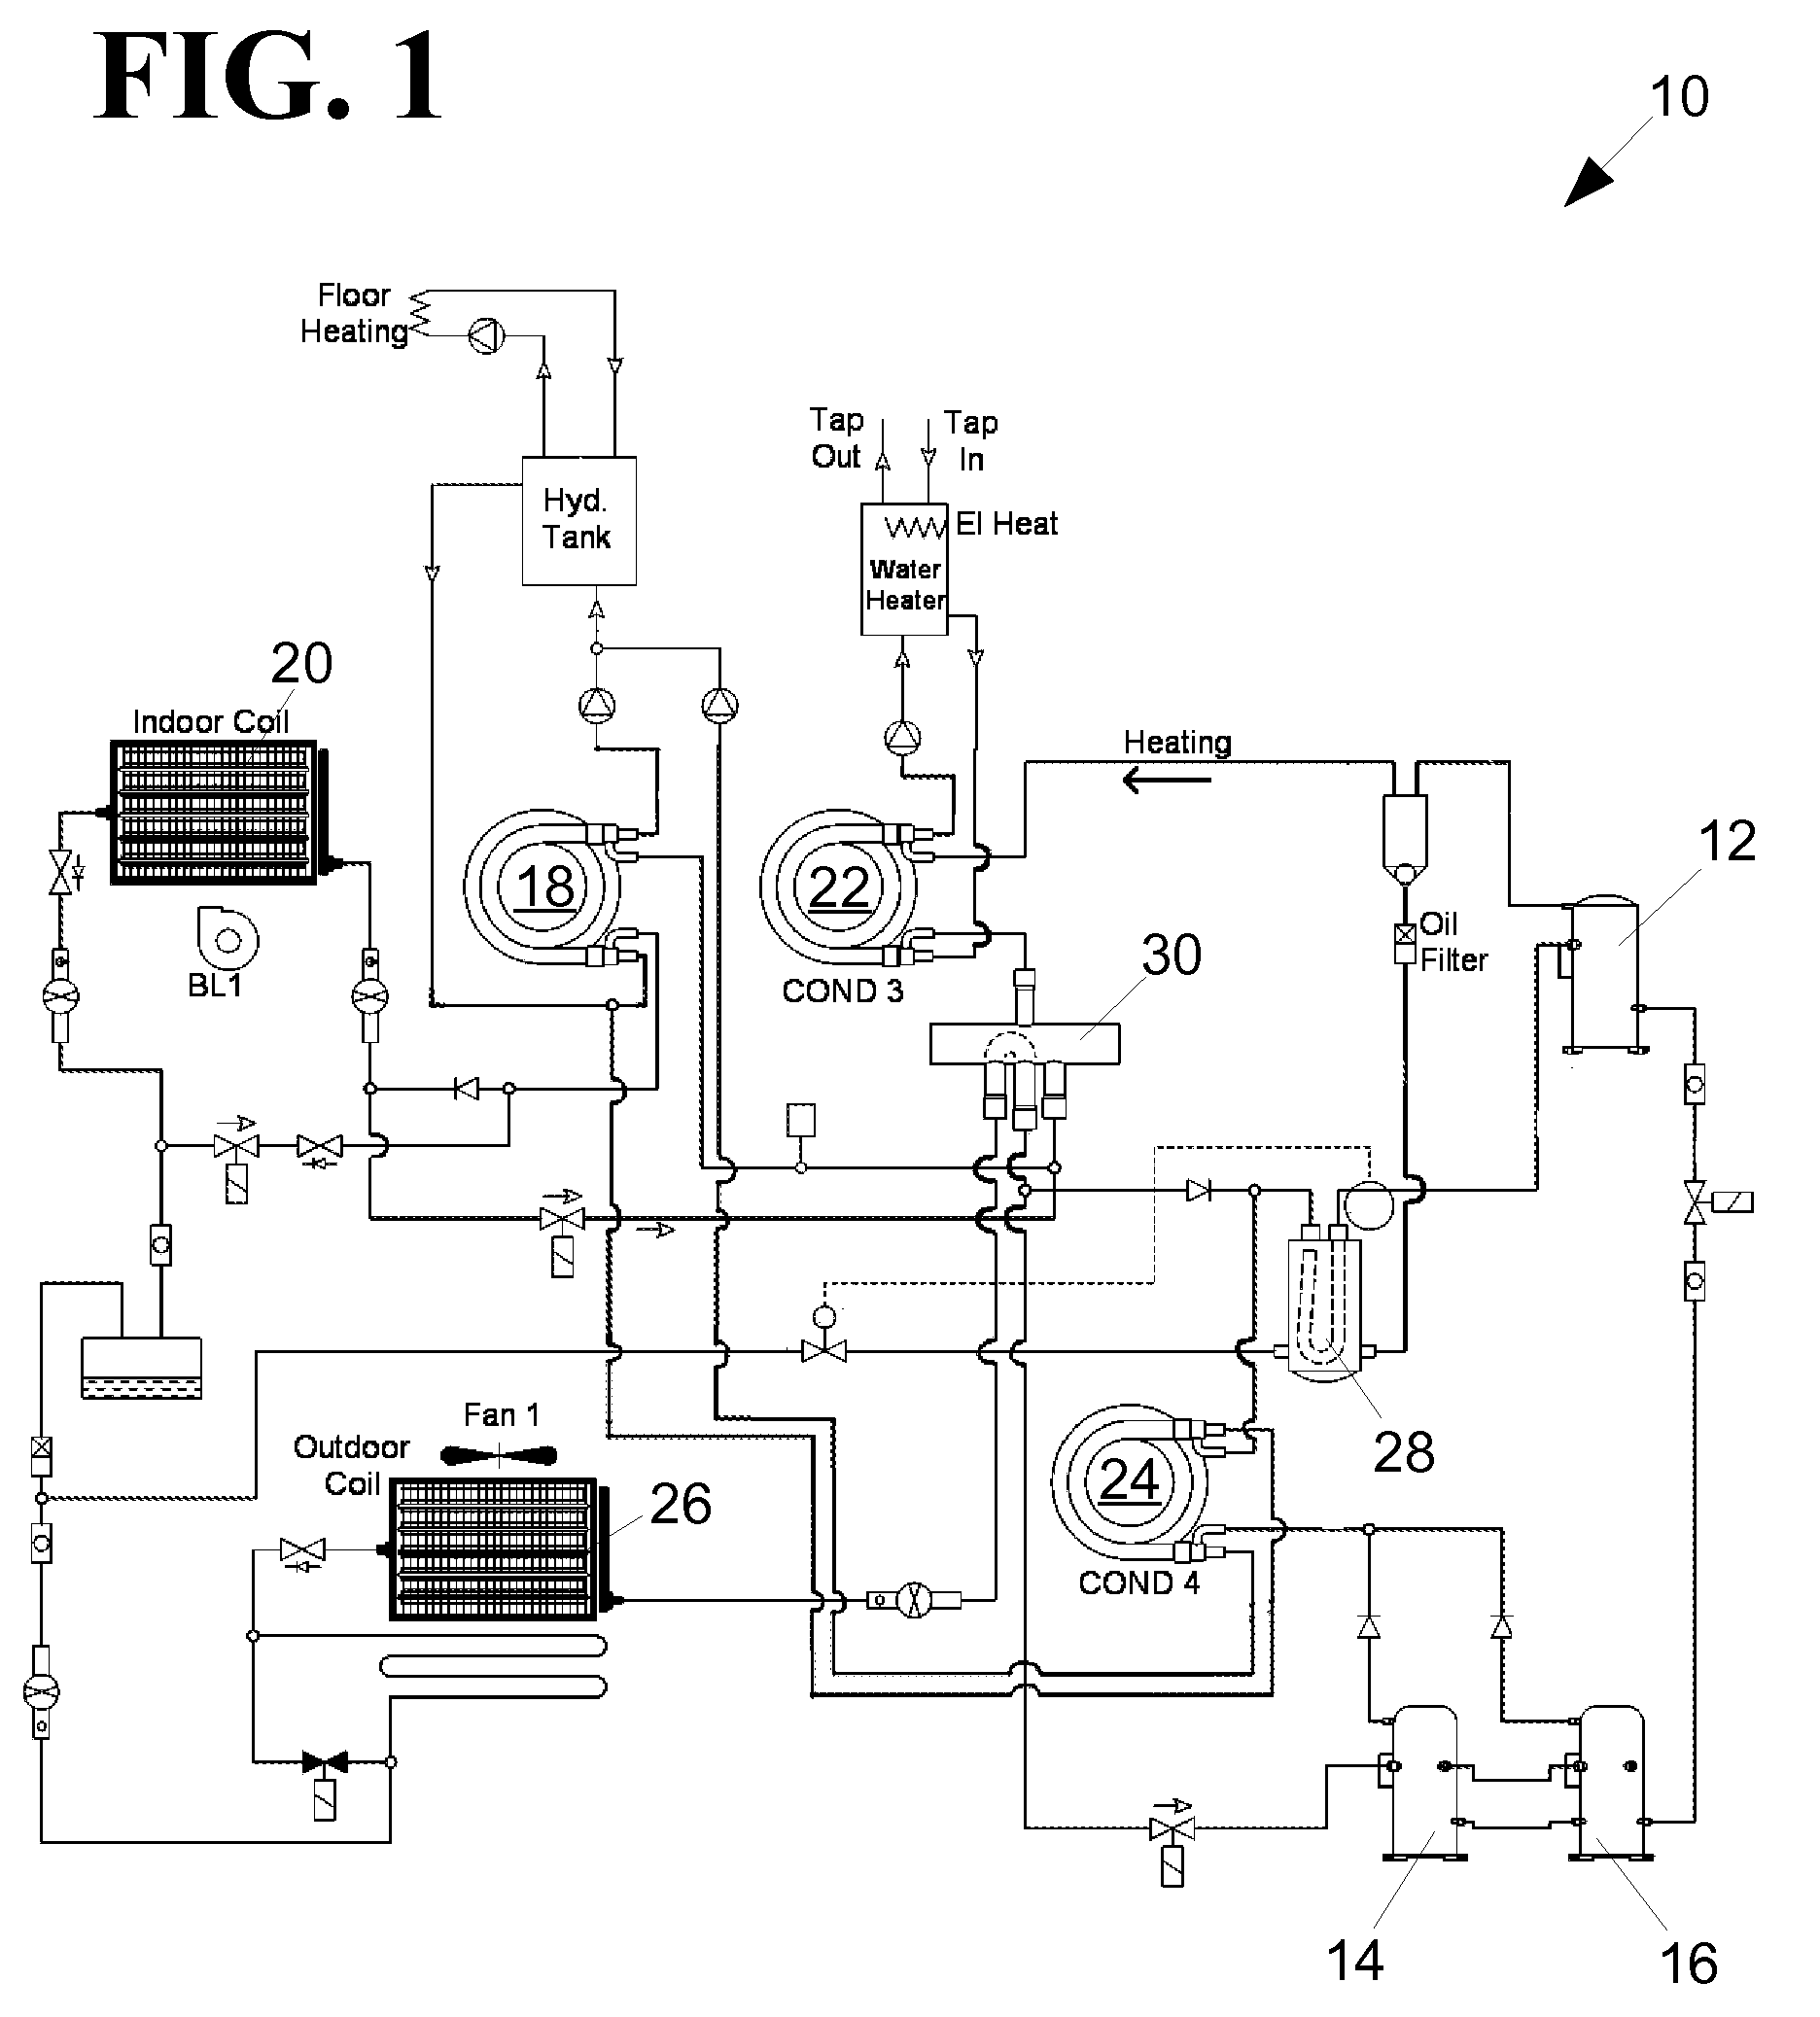 Heat pump with forced air heating regulated by withdrawal of heat to a radiant heating system